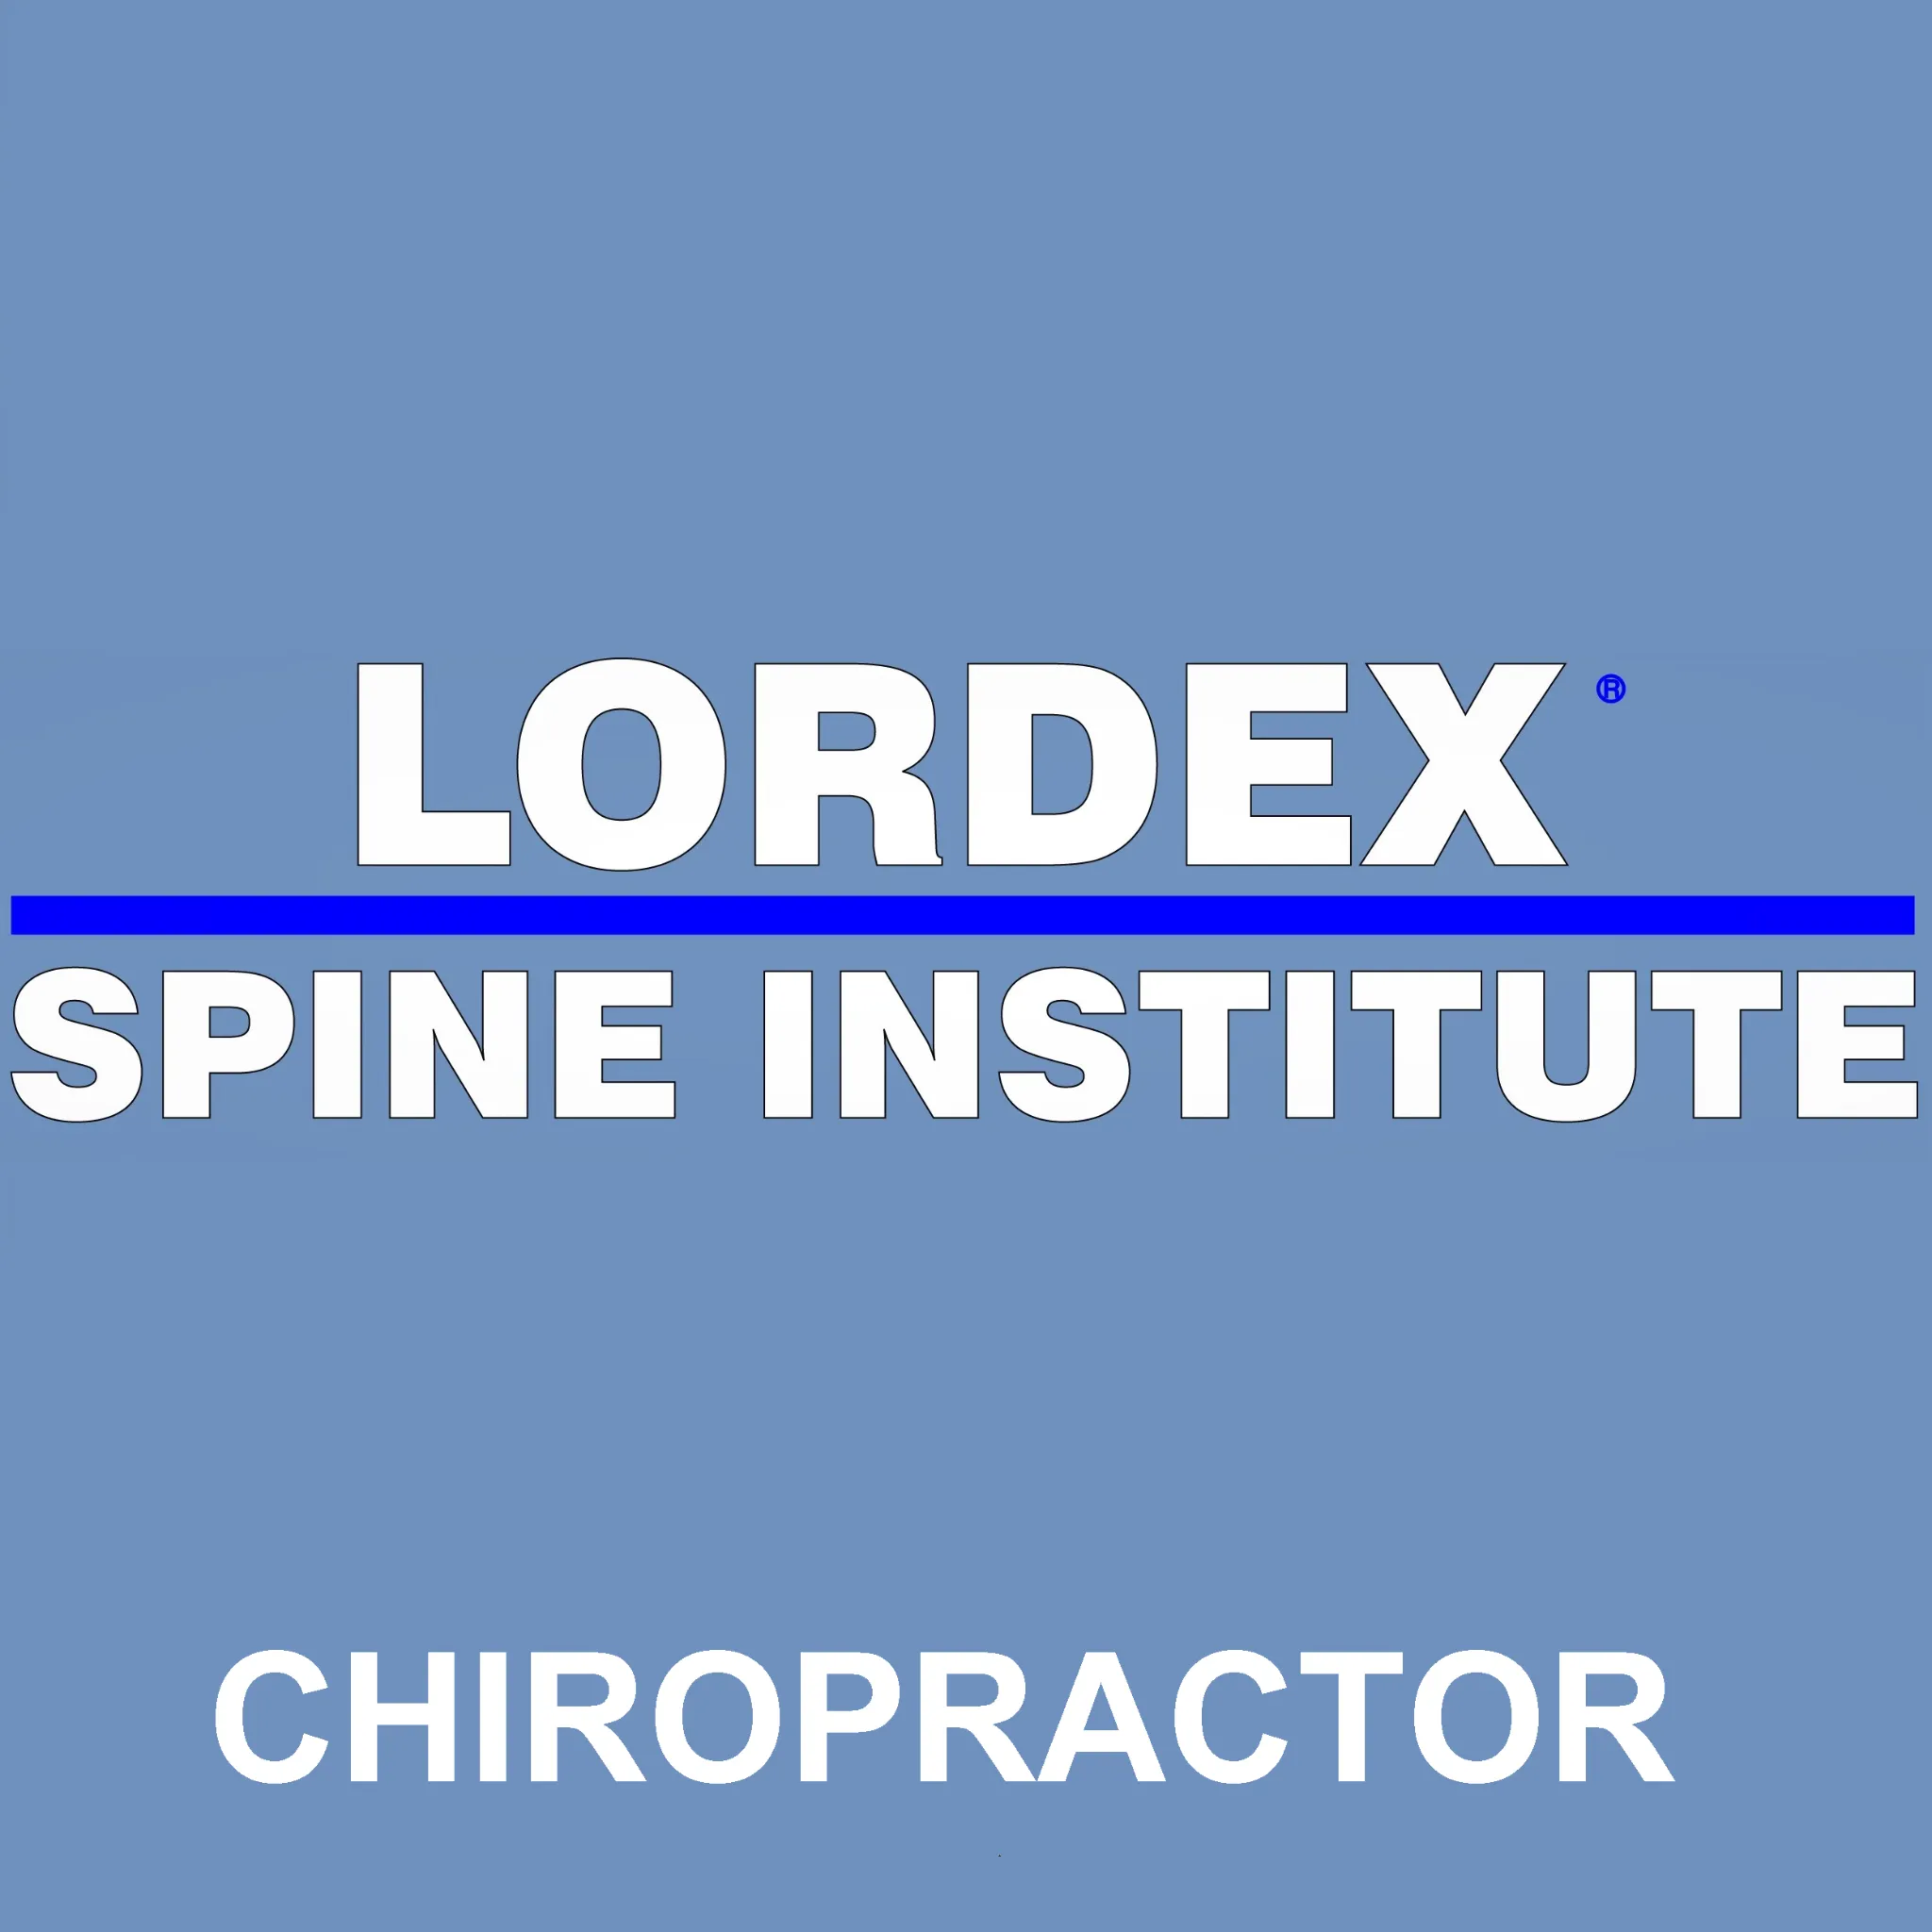 Lordex Spine Institute - Chiropractor League City